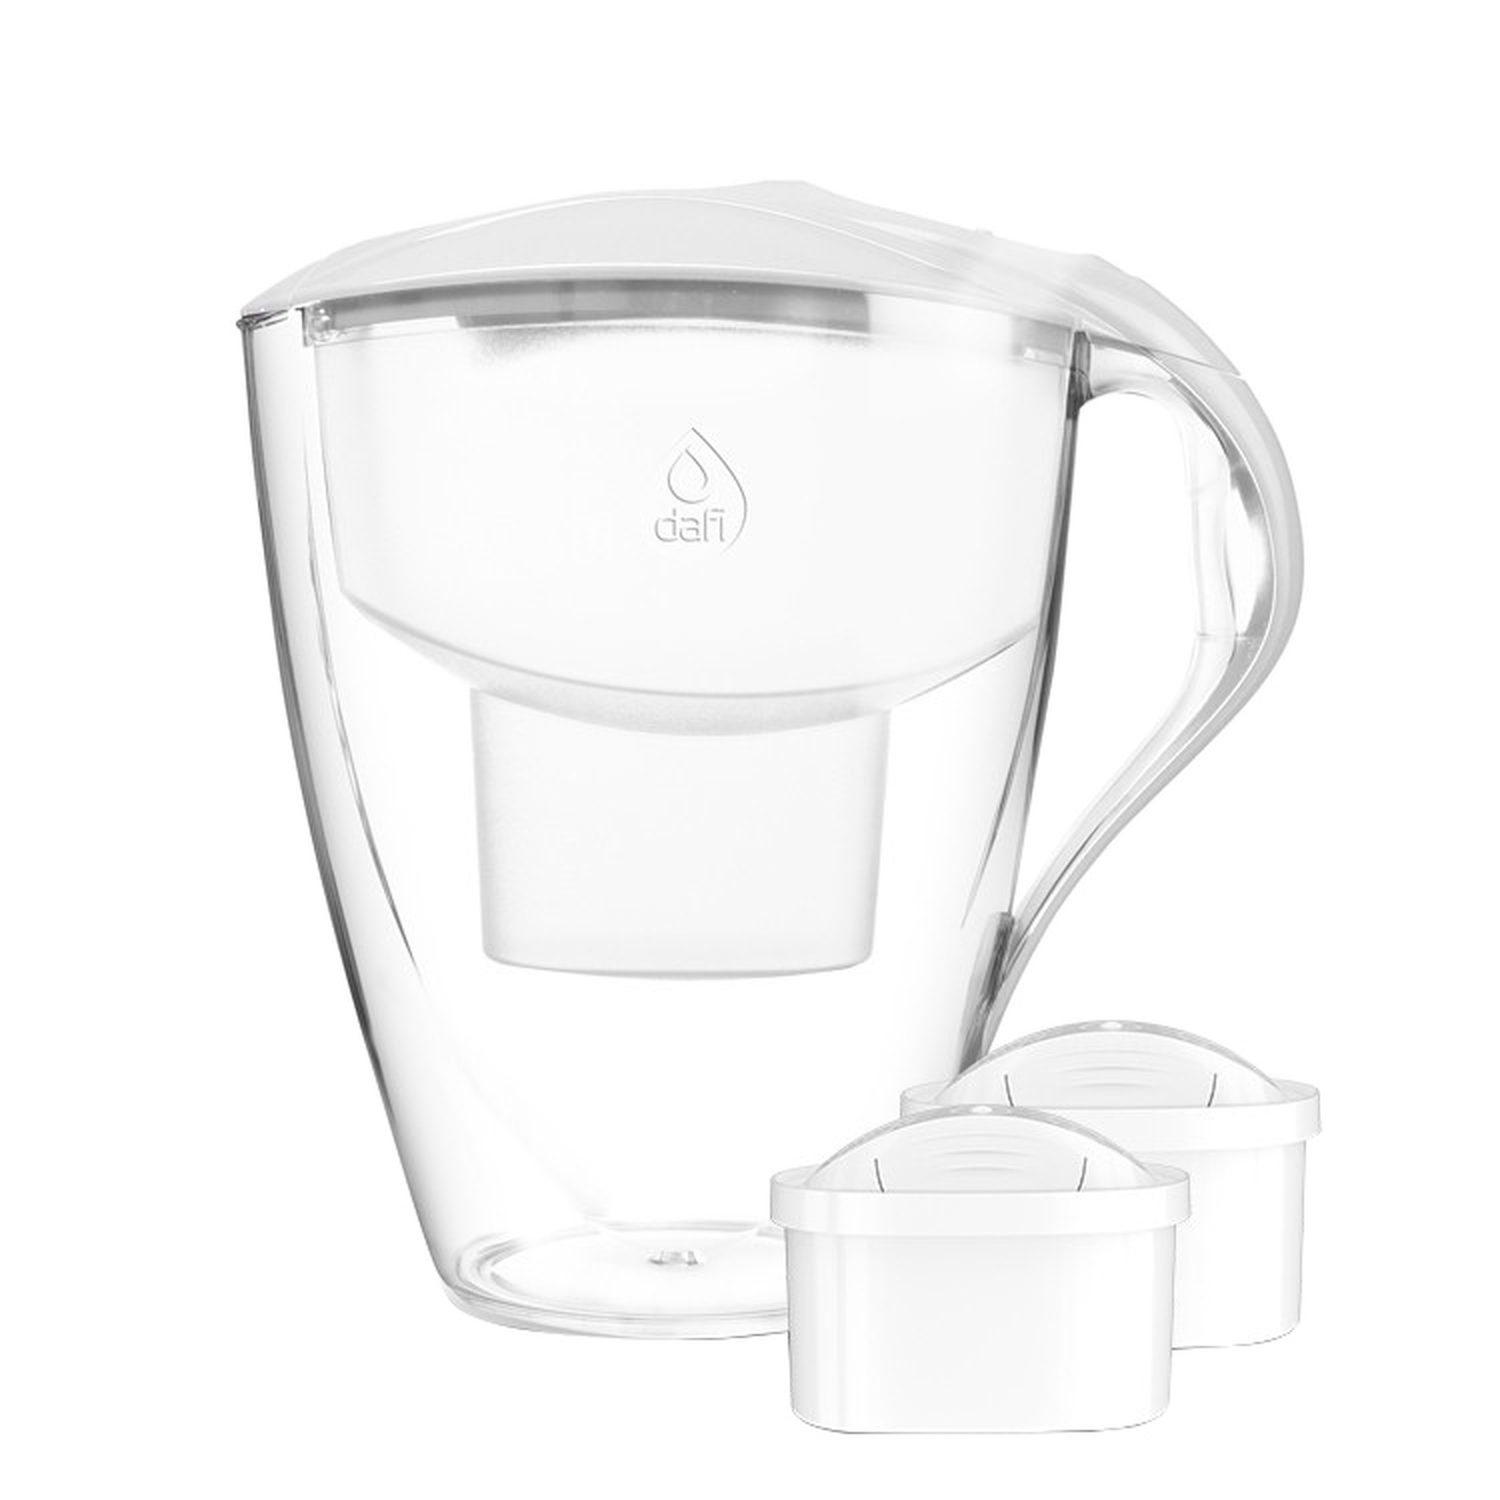 Dafi - Omega 4l Water Pitcher + 2 Unimax Filters - White